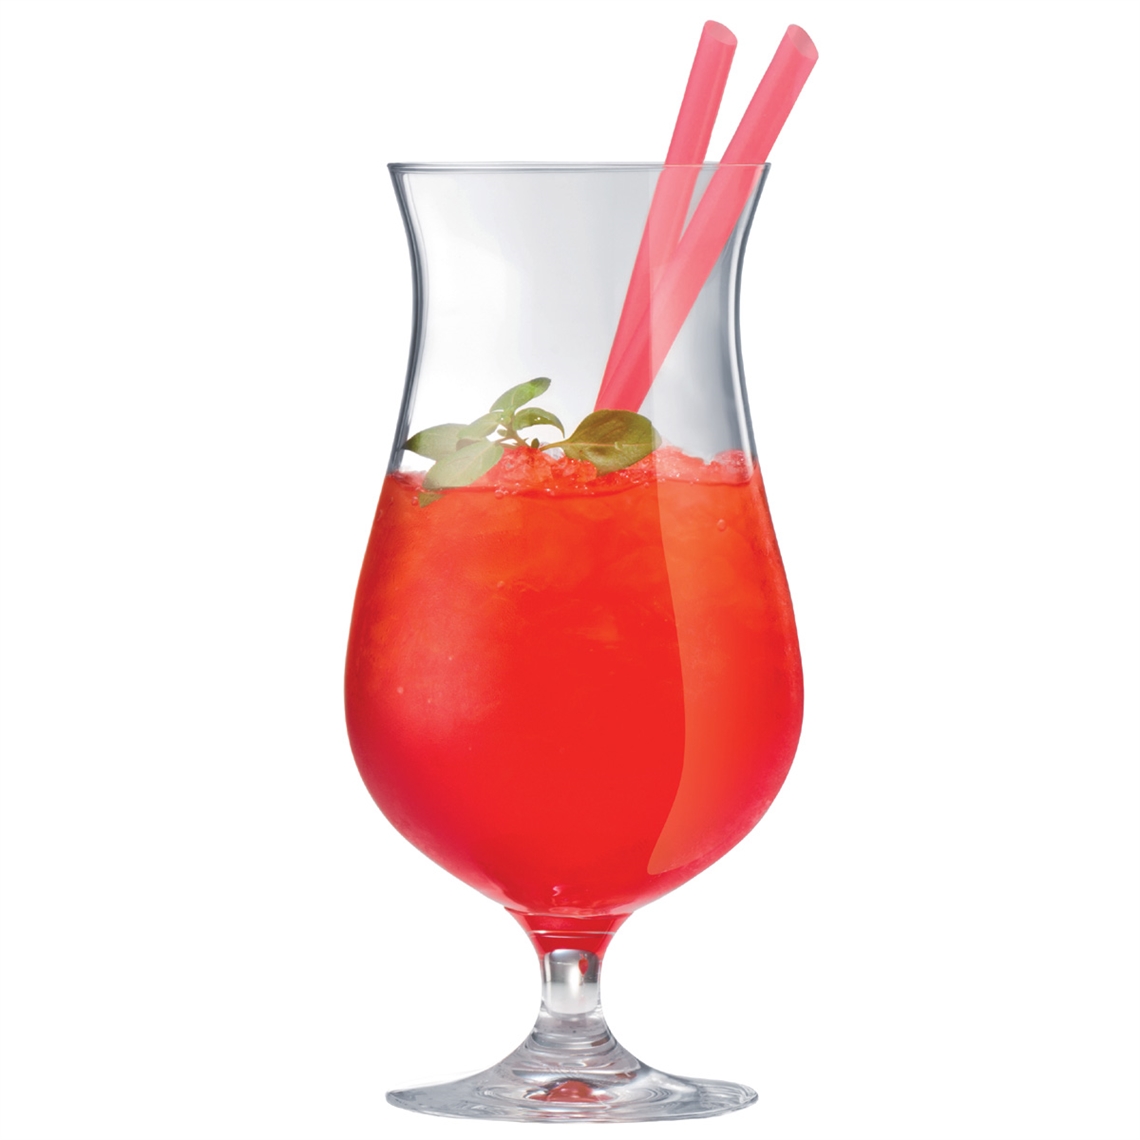 View more glassware from our Cocktail Glasses range